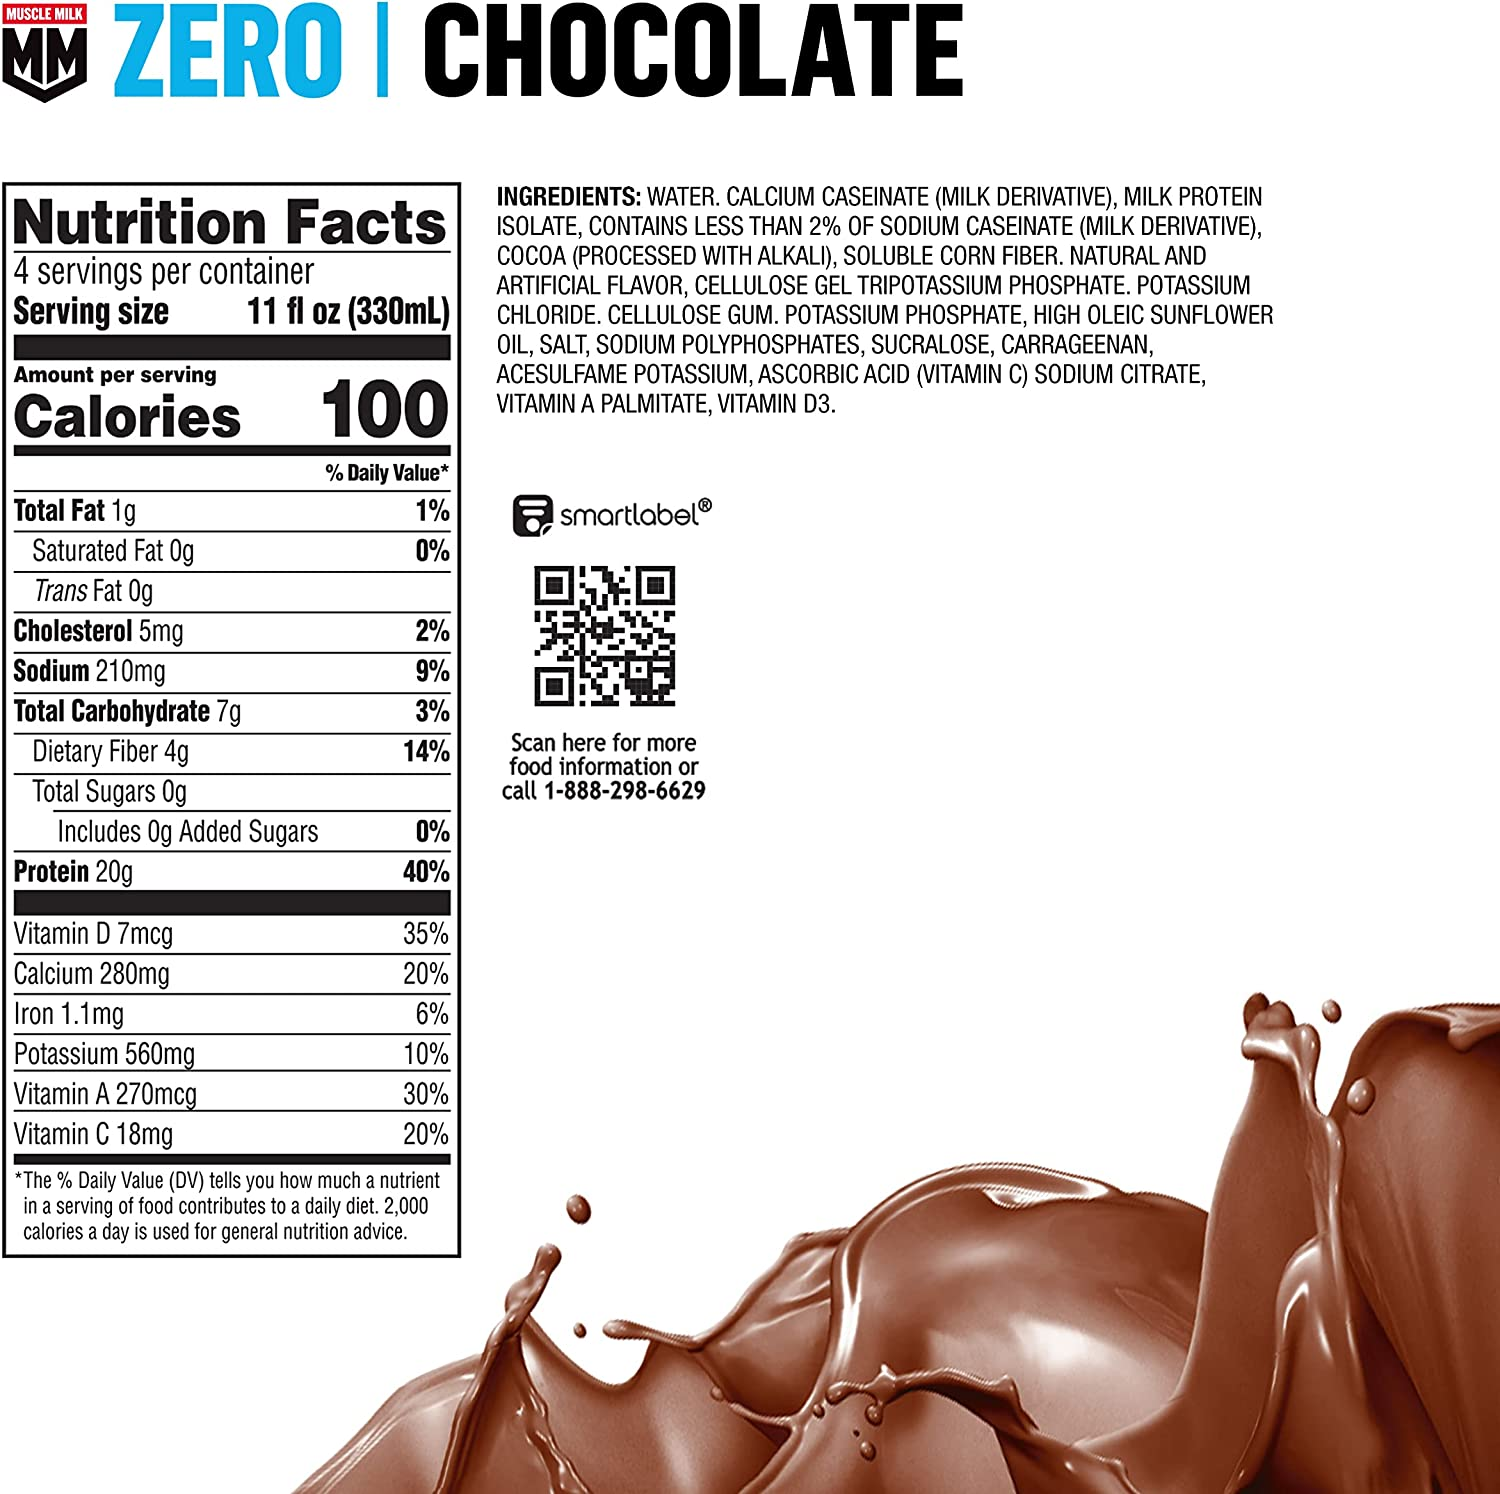 Muscle Milk Zero Protein Shake, Chocolate, 11 Fl Oz Carton, 12 Pack, 20G Protein, Zero Sugar, 100 Calories, Calcium, Vitamins A, C & D, 4G Fiber, Energizing Snack, Workout Recovery, Packaging May Vary